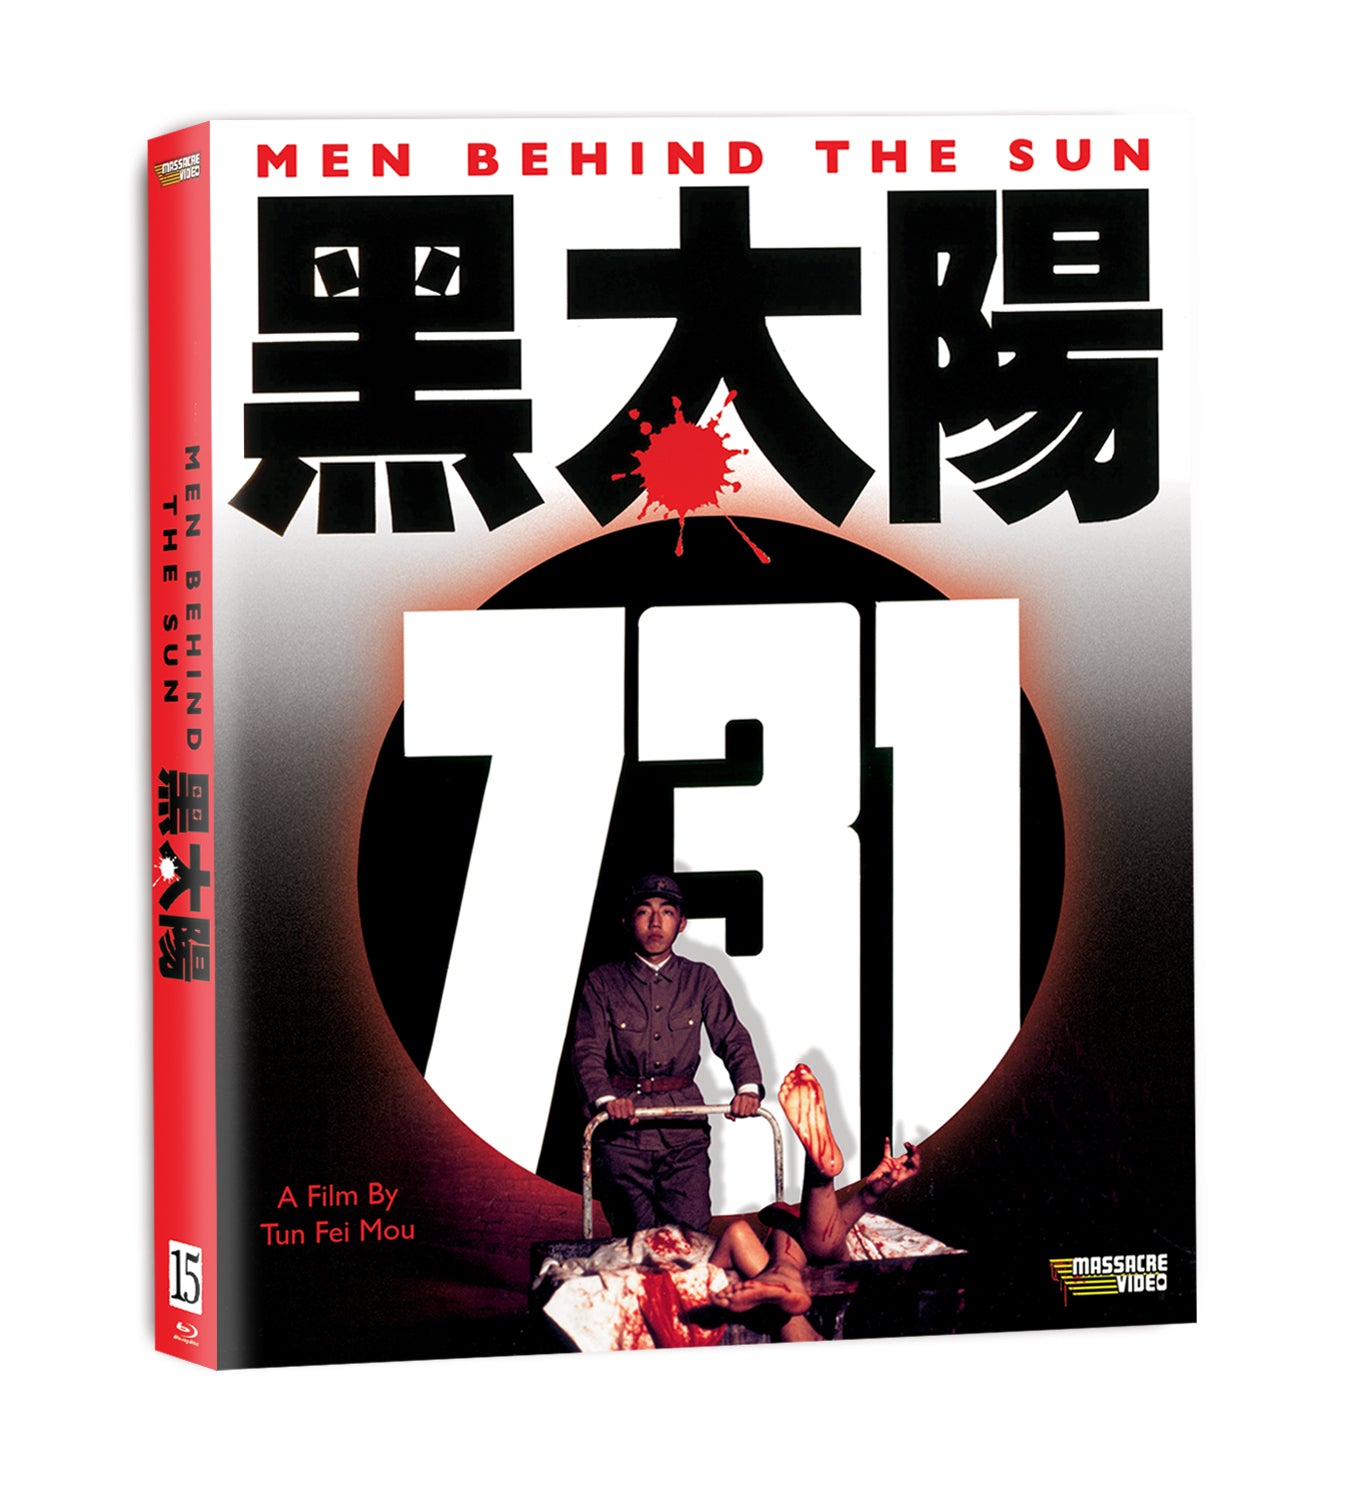 Men Behind the Sun Limited Edition Massacre Video Blu-Ray [NEW] [SLIPCOVER]